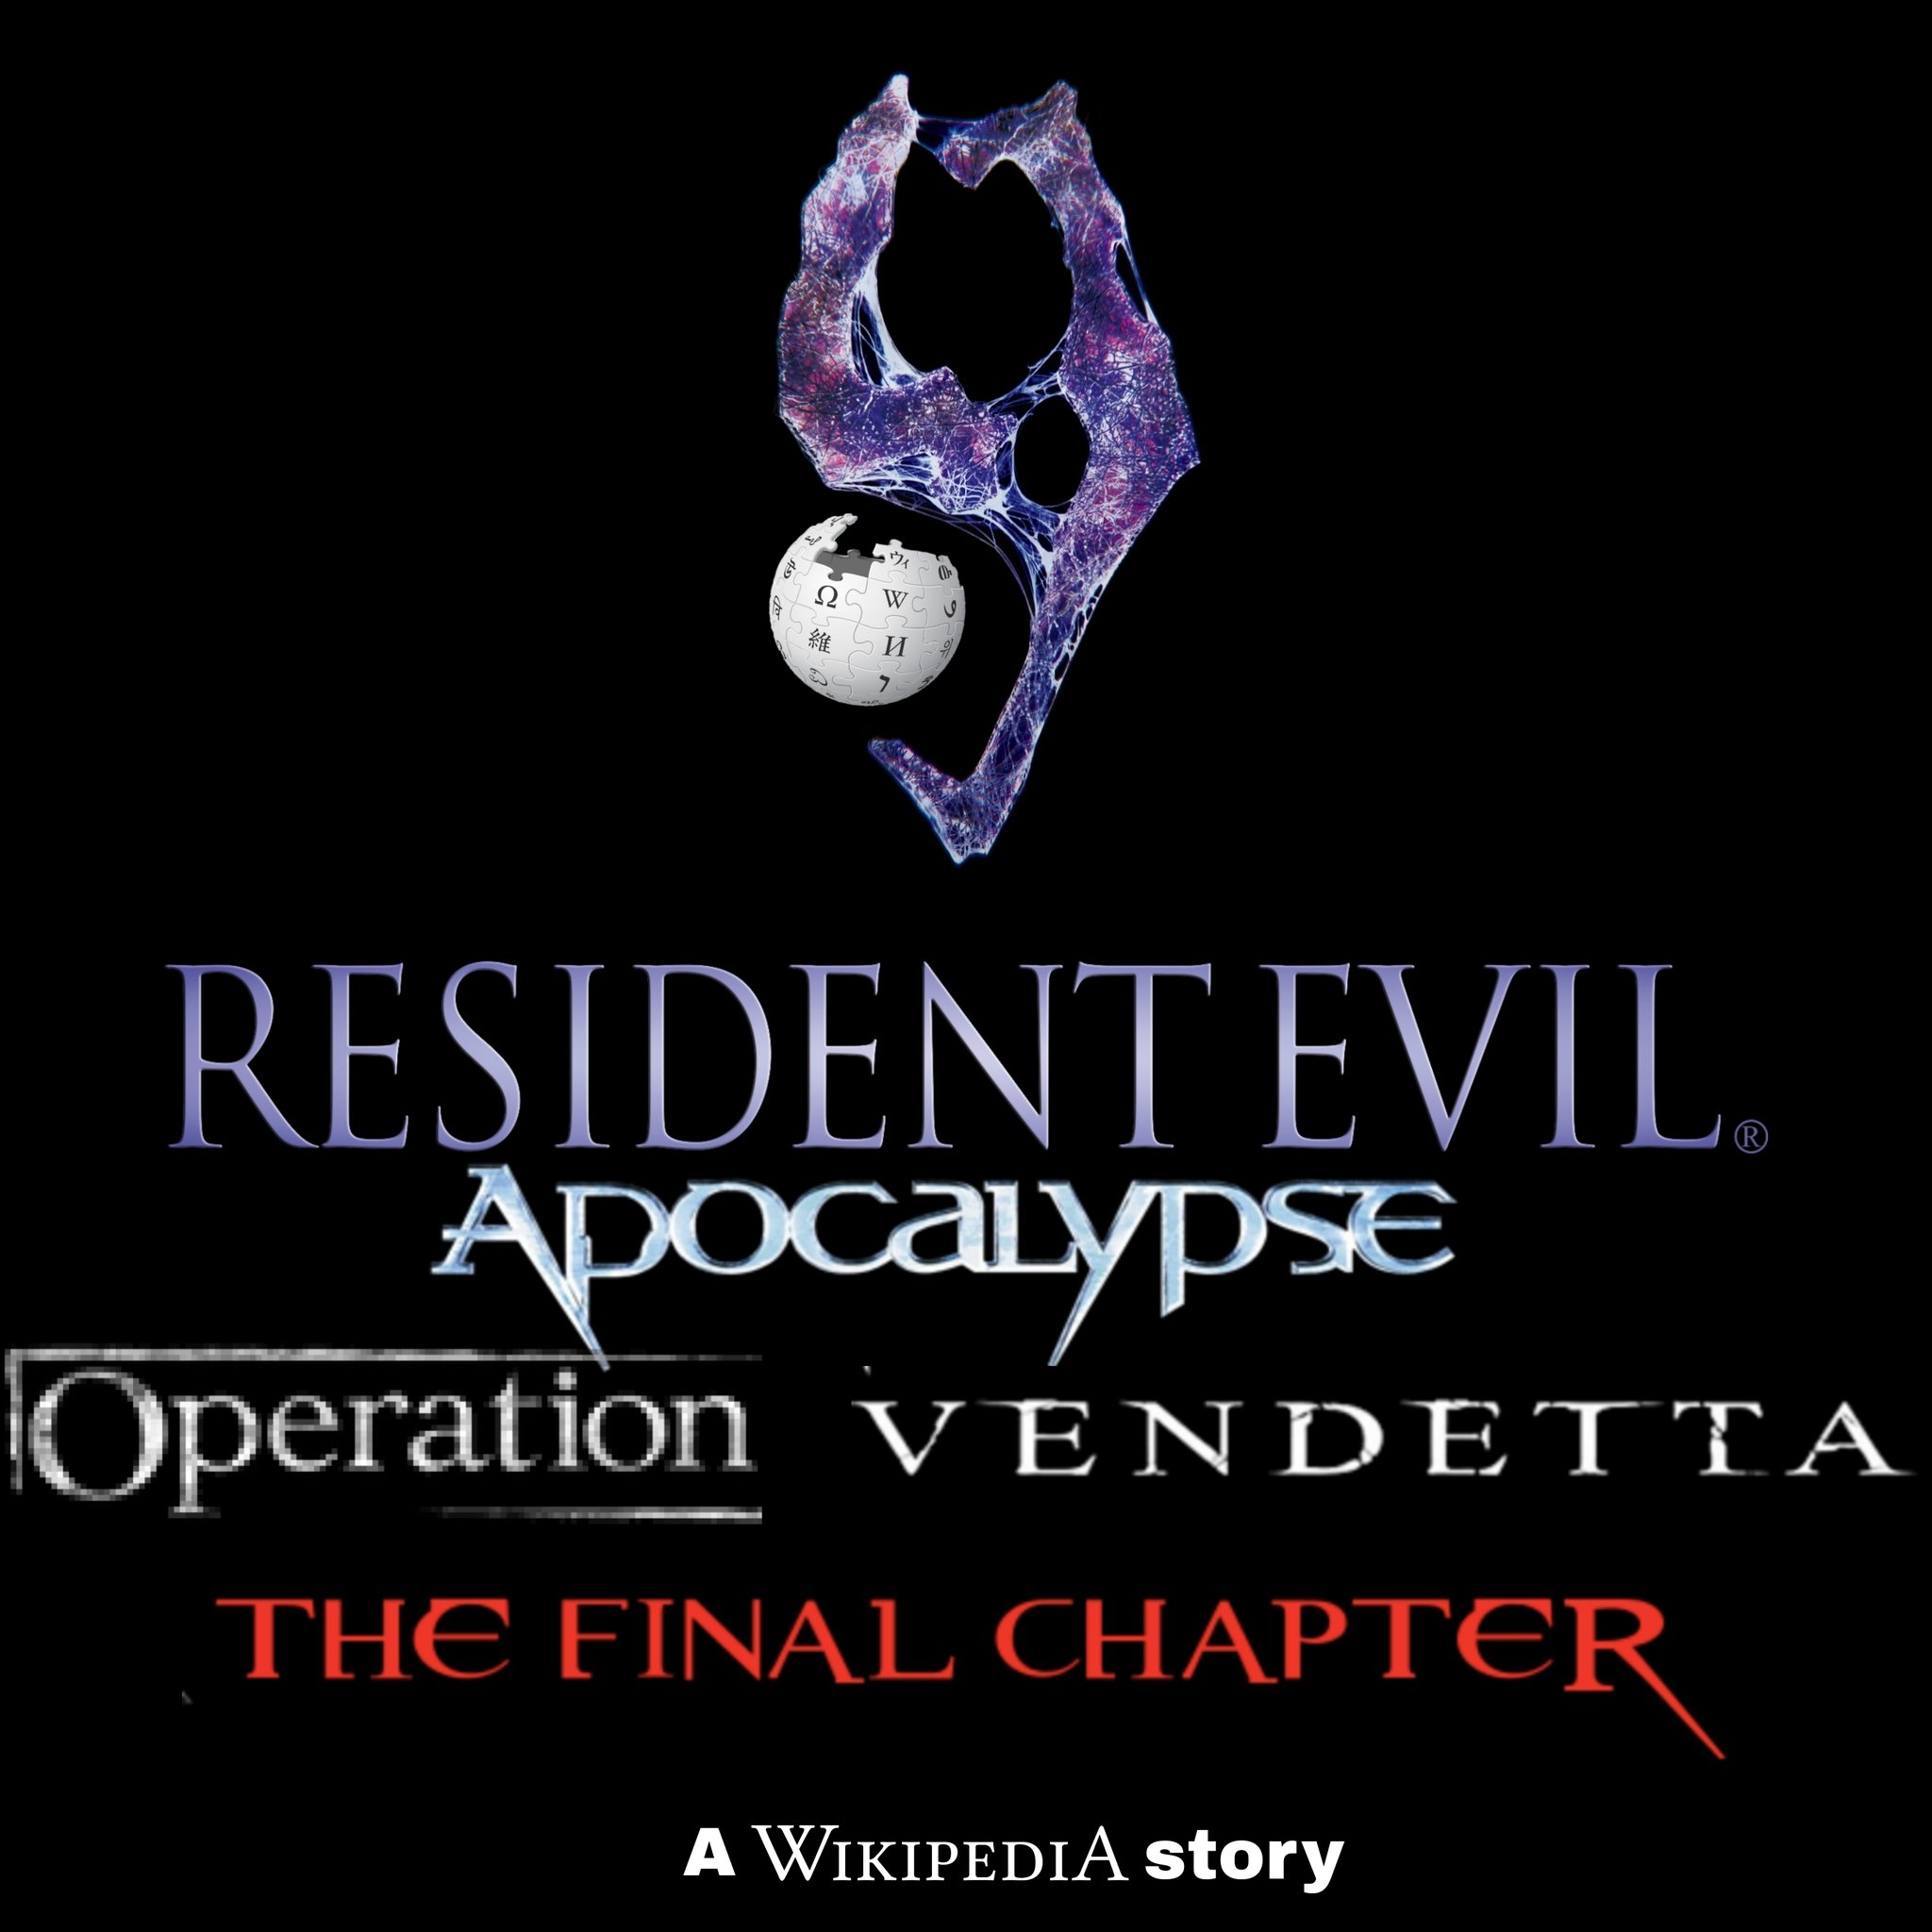 Resident Evil: The Final Chapter - Wikipedia